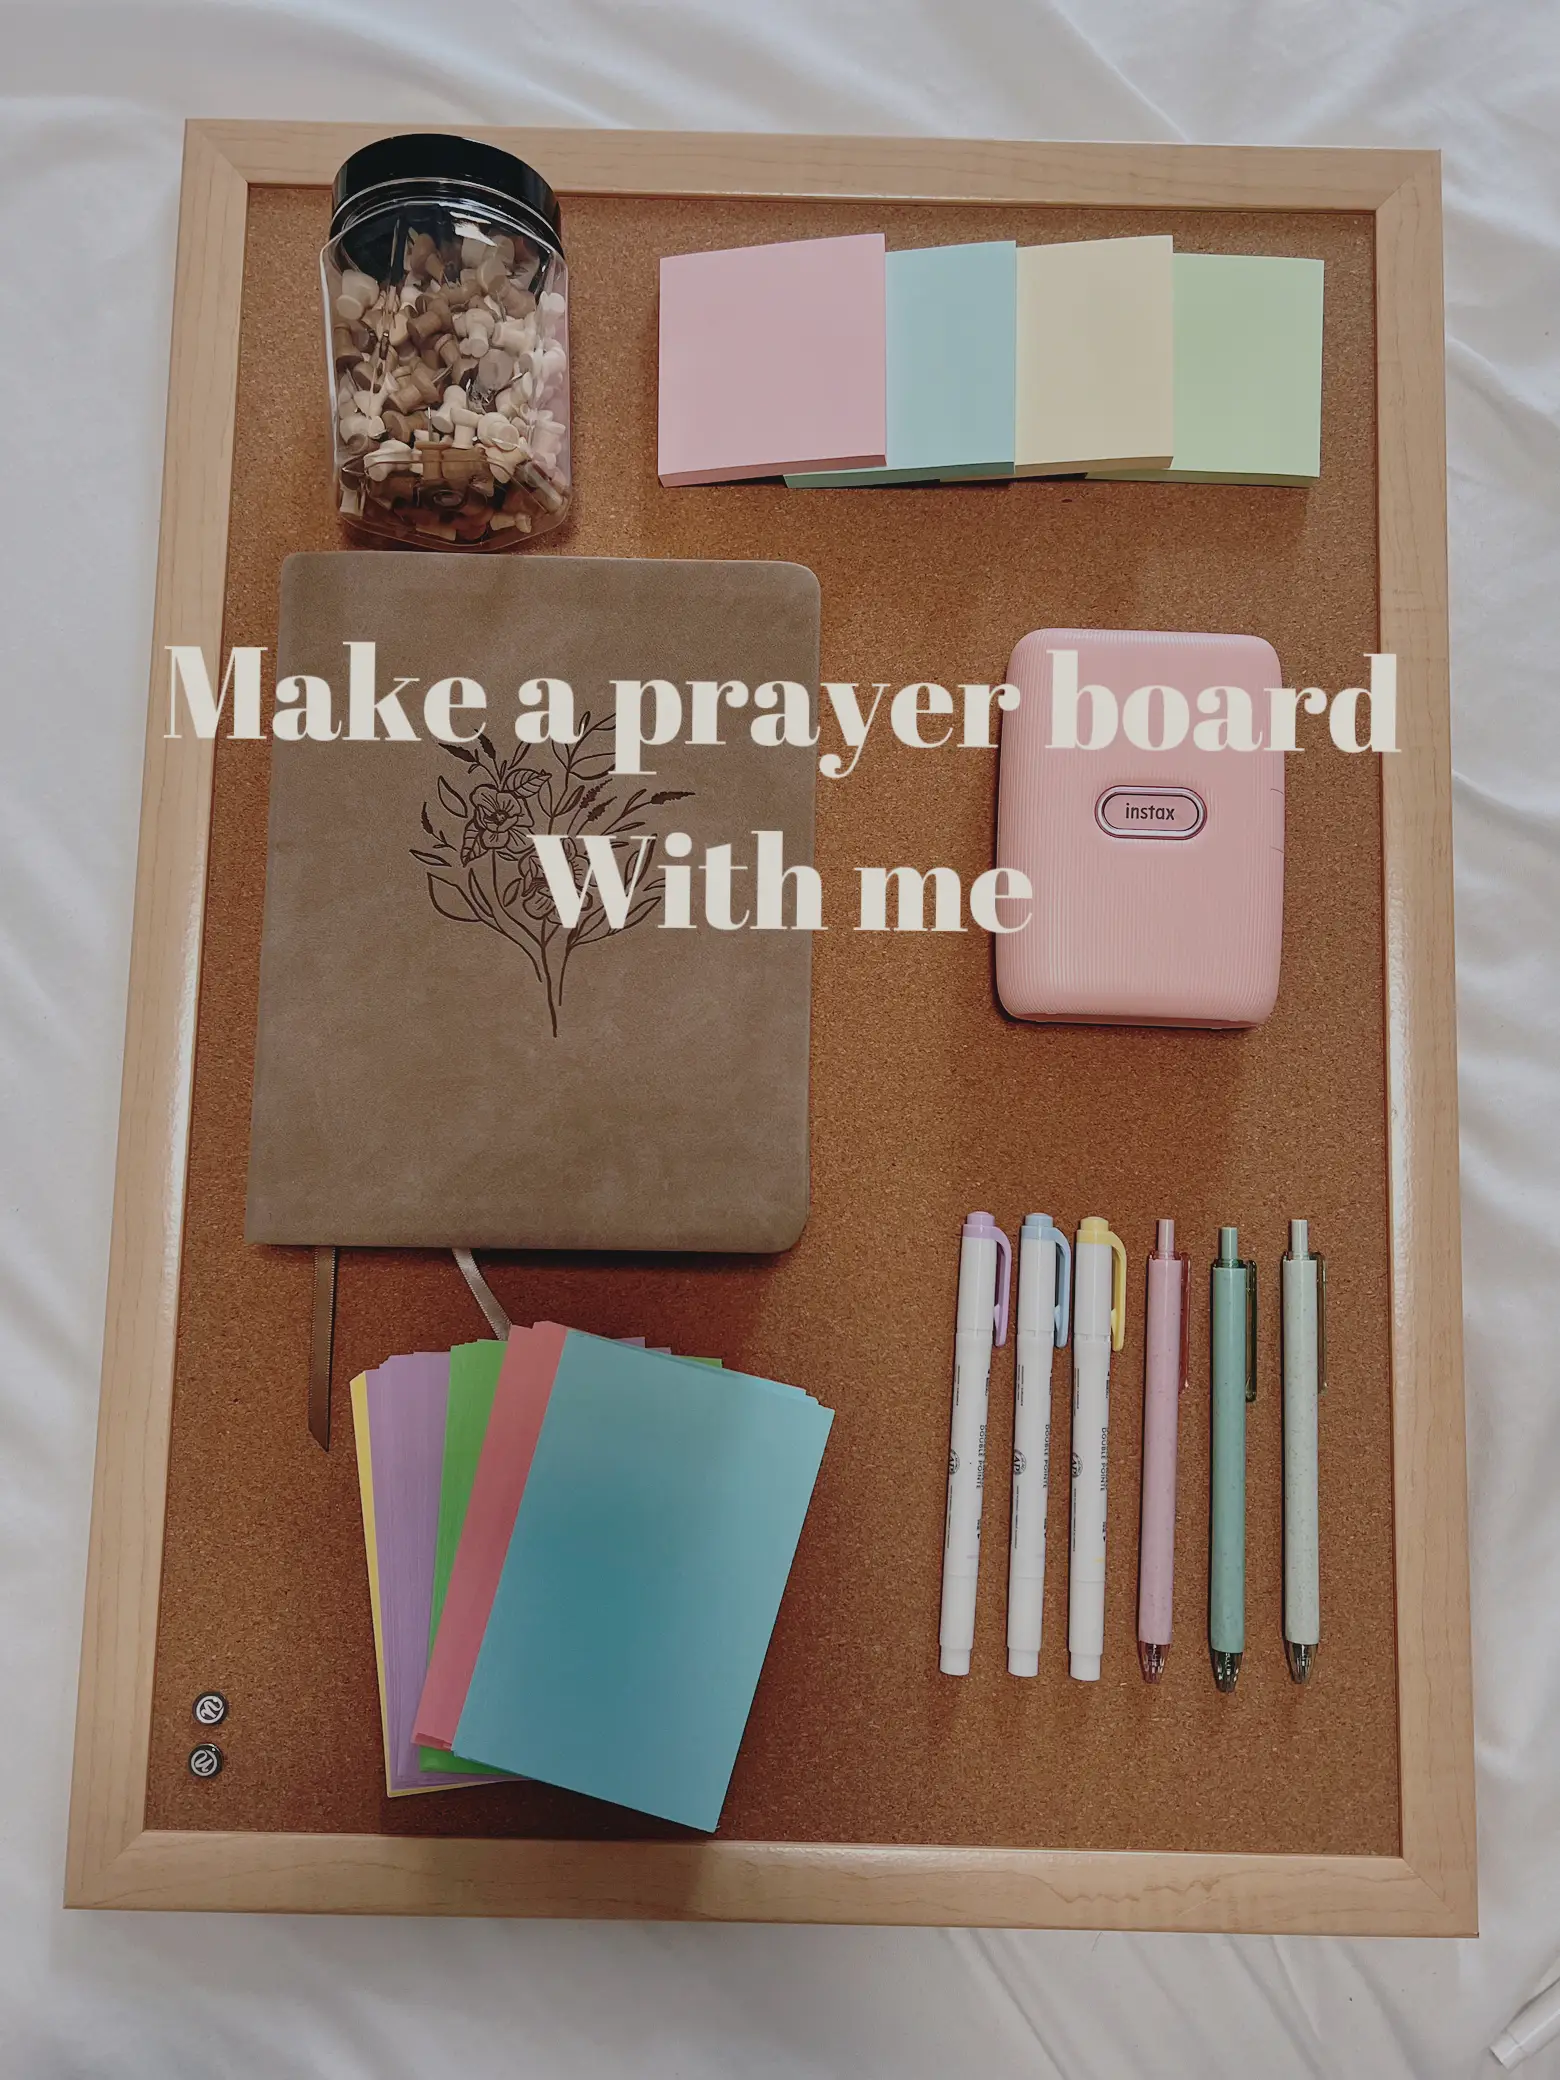 How to make a PRAYER board  tutorial, supplies, vision for prayer life 